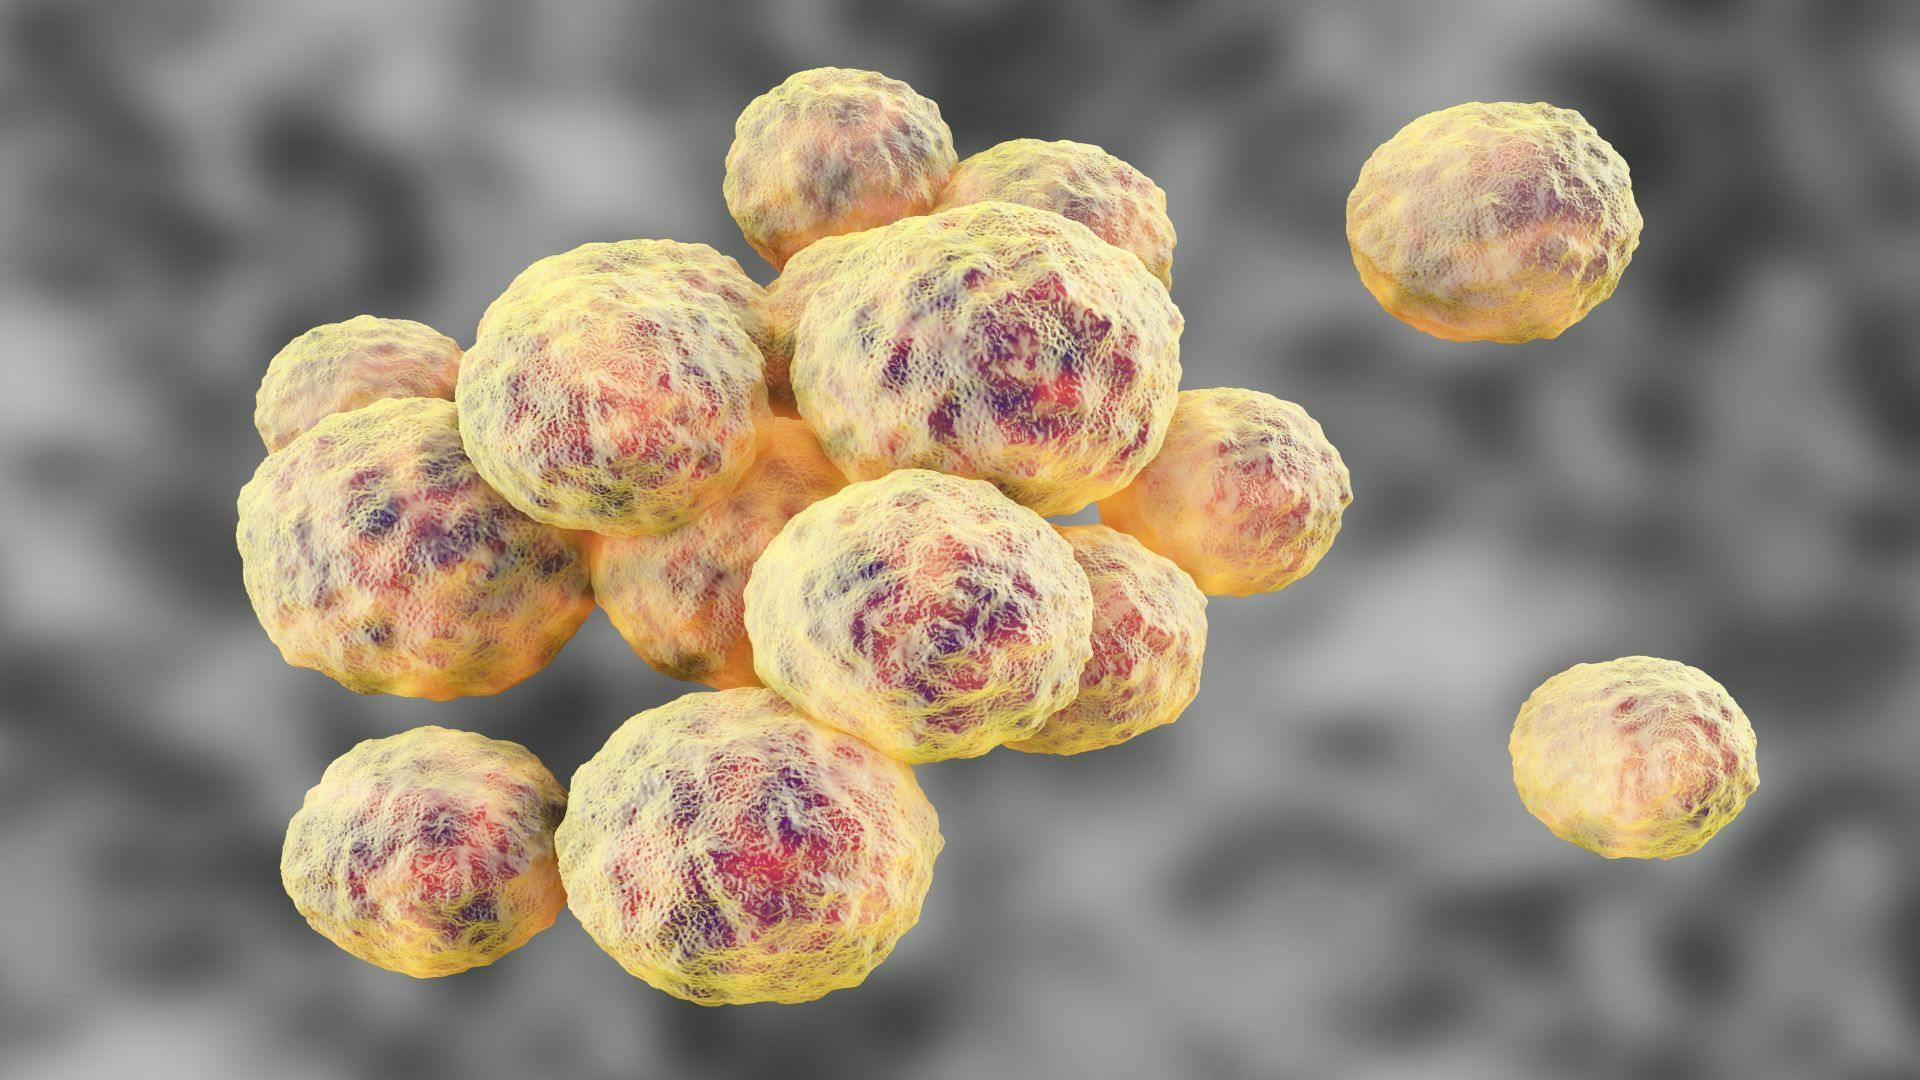 MRSA Survival Chances Predicted by DNA Sequencing the Superbug